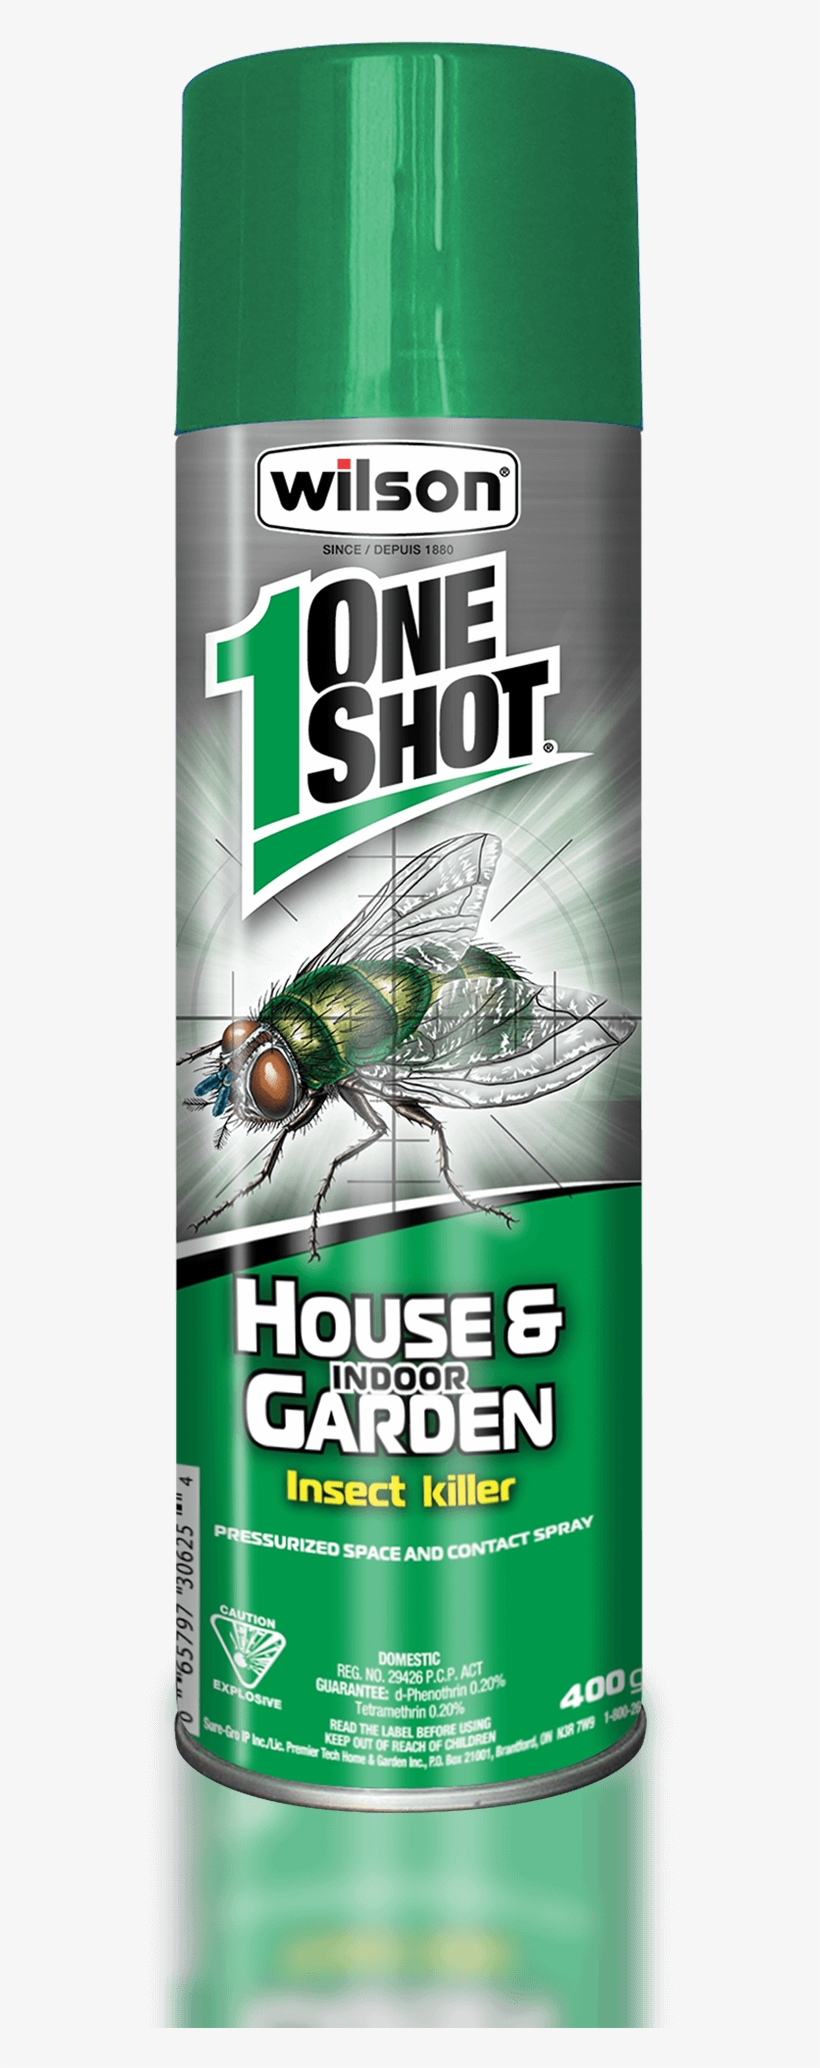 Wilson One Shot House & Garden Insect Killer - Insect Killer Png, transparent png #9885332